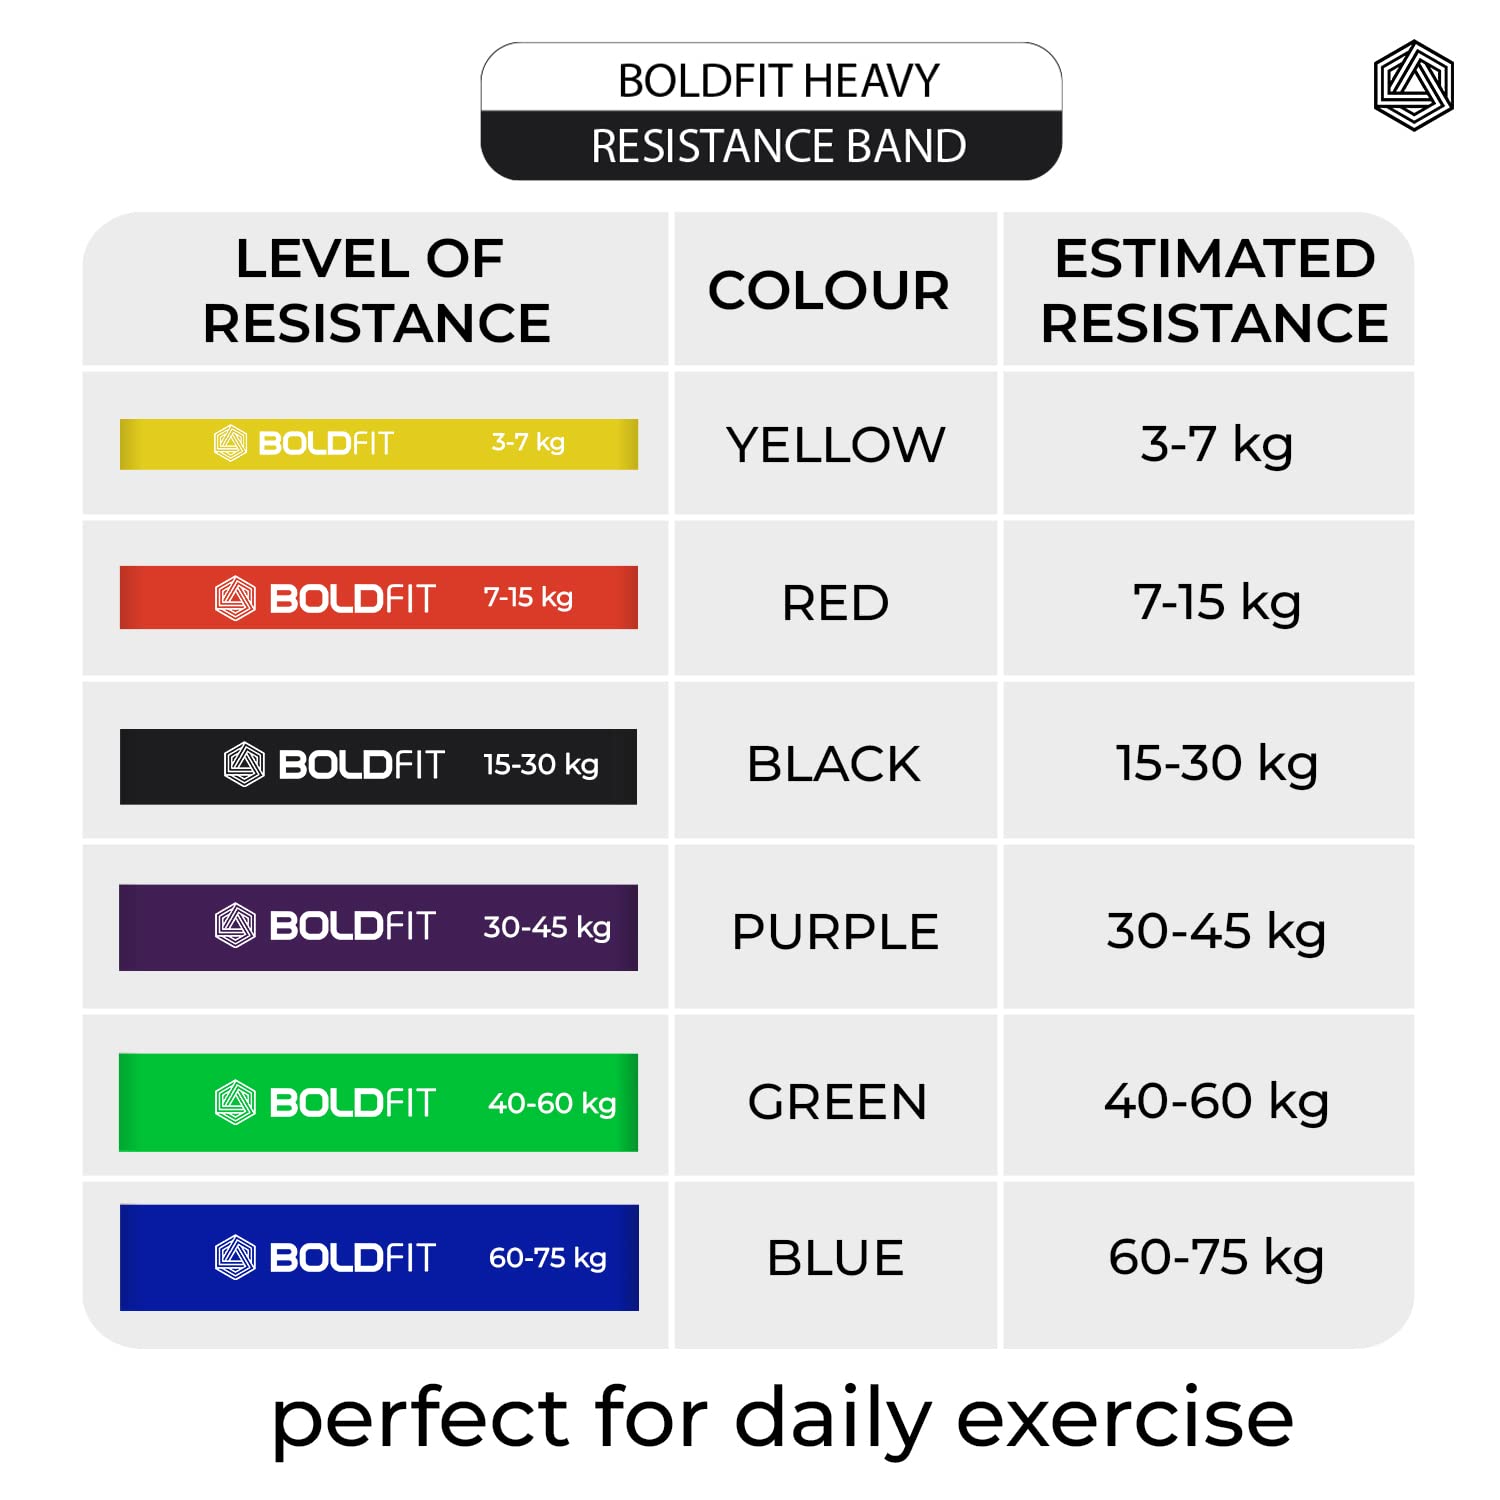 heavy resistance bands weight equivalent